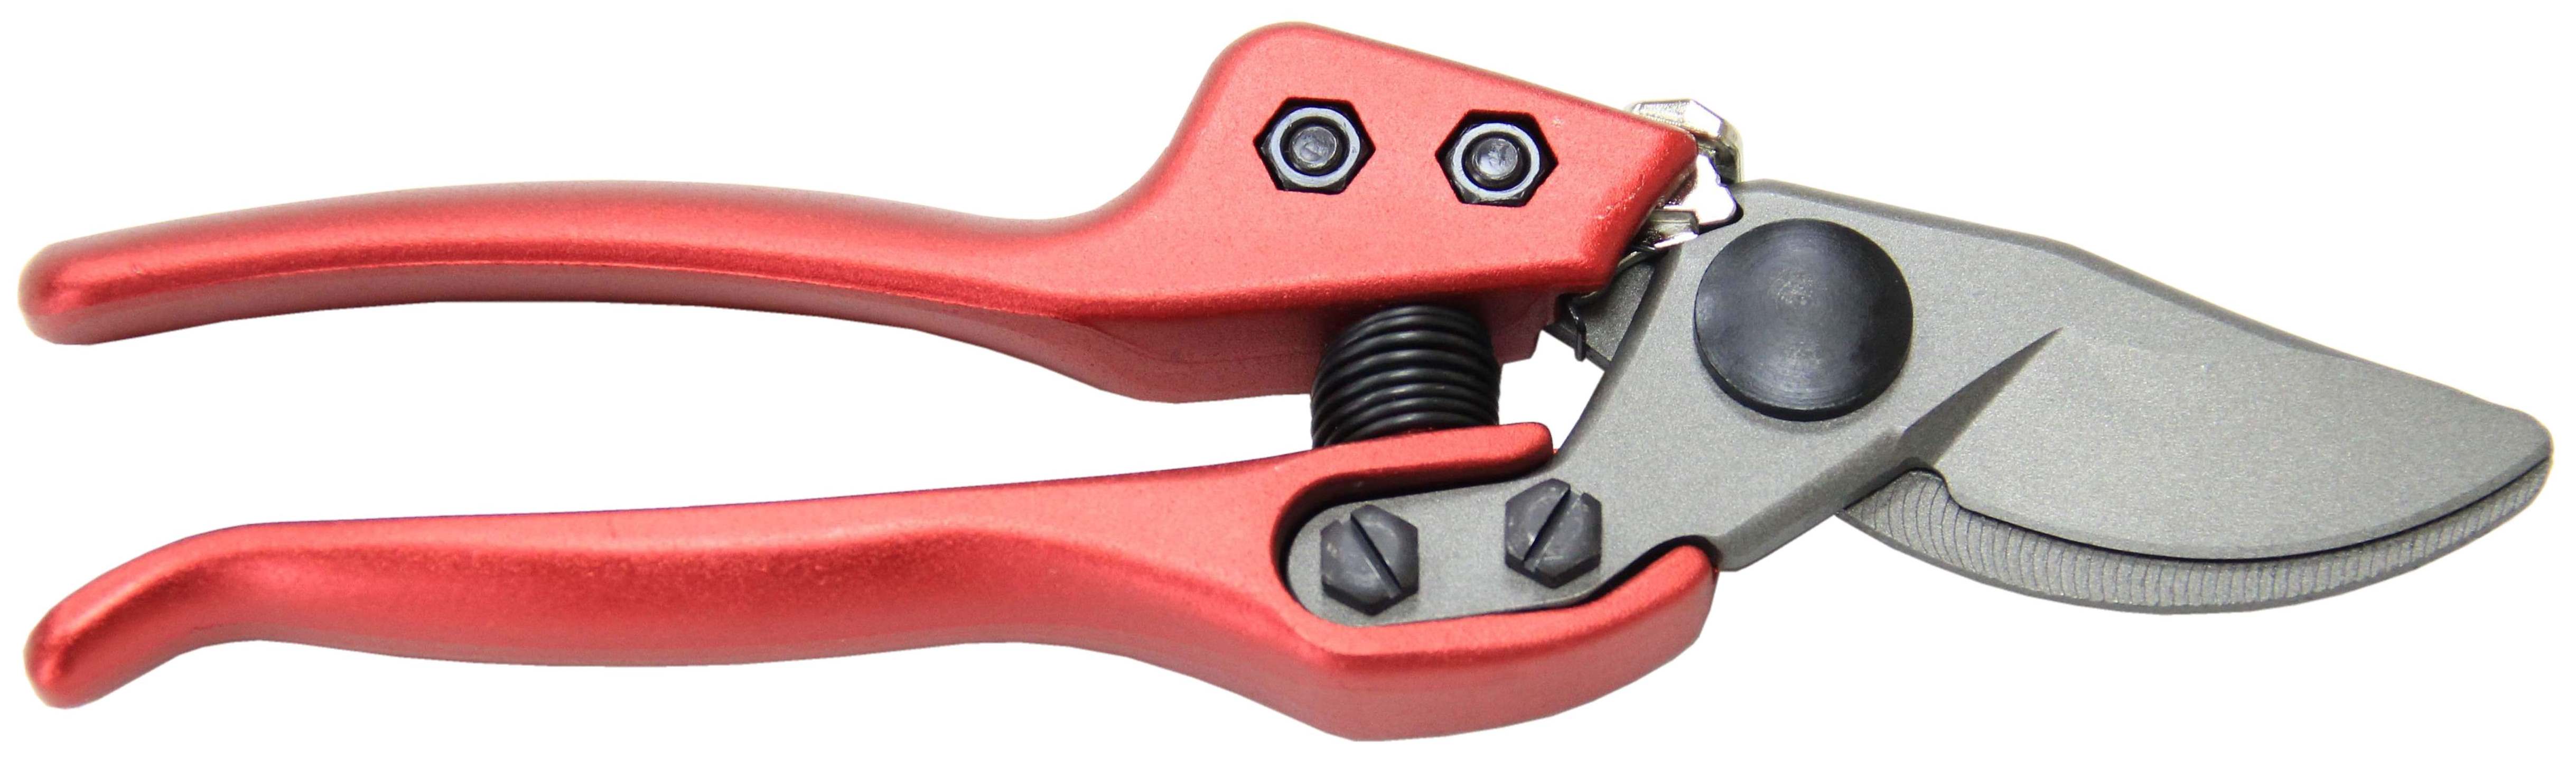 8”(201mm) Quick Release Bypass Pruner, Drop Forged Handles